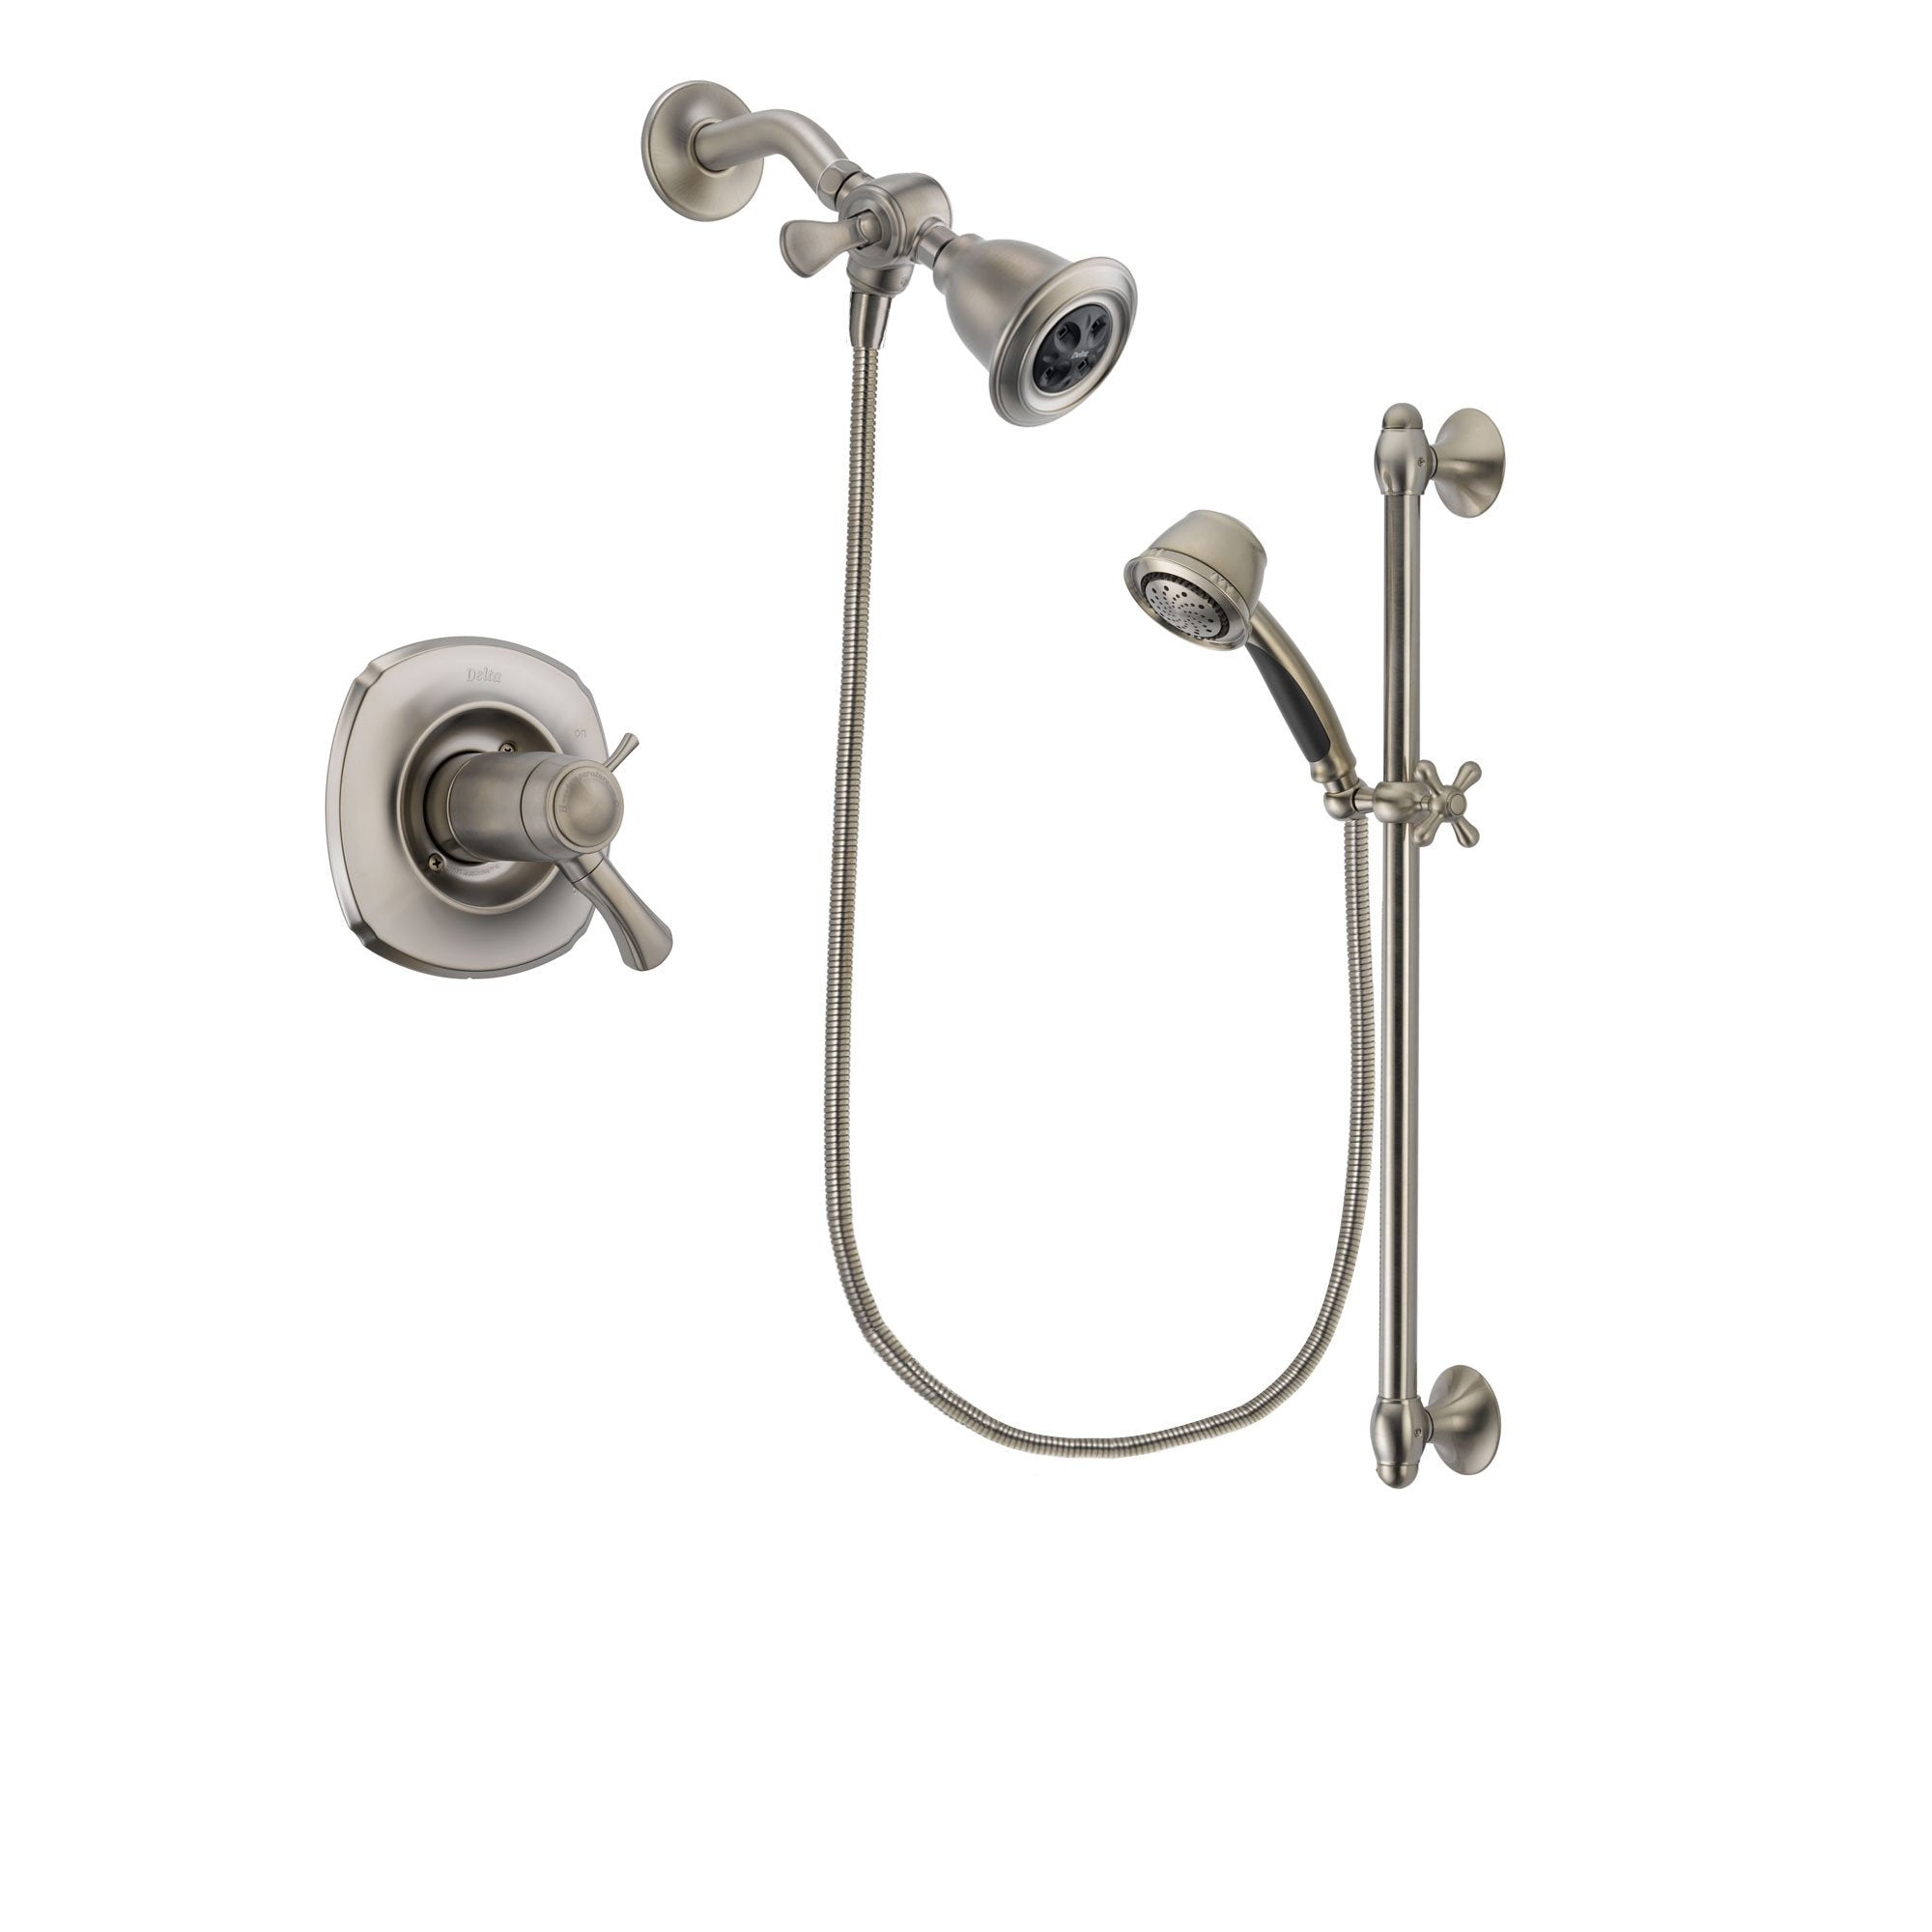 Delta Addison Stainless Steel Finish Thermostatic Shower Faucet System Package with Water Efficient Showerhead and 5-Spray Personal Handshower with Slide Bar Includes Rough-in Valve DSP1282V